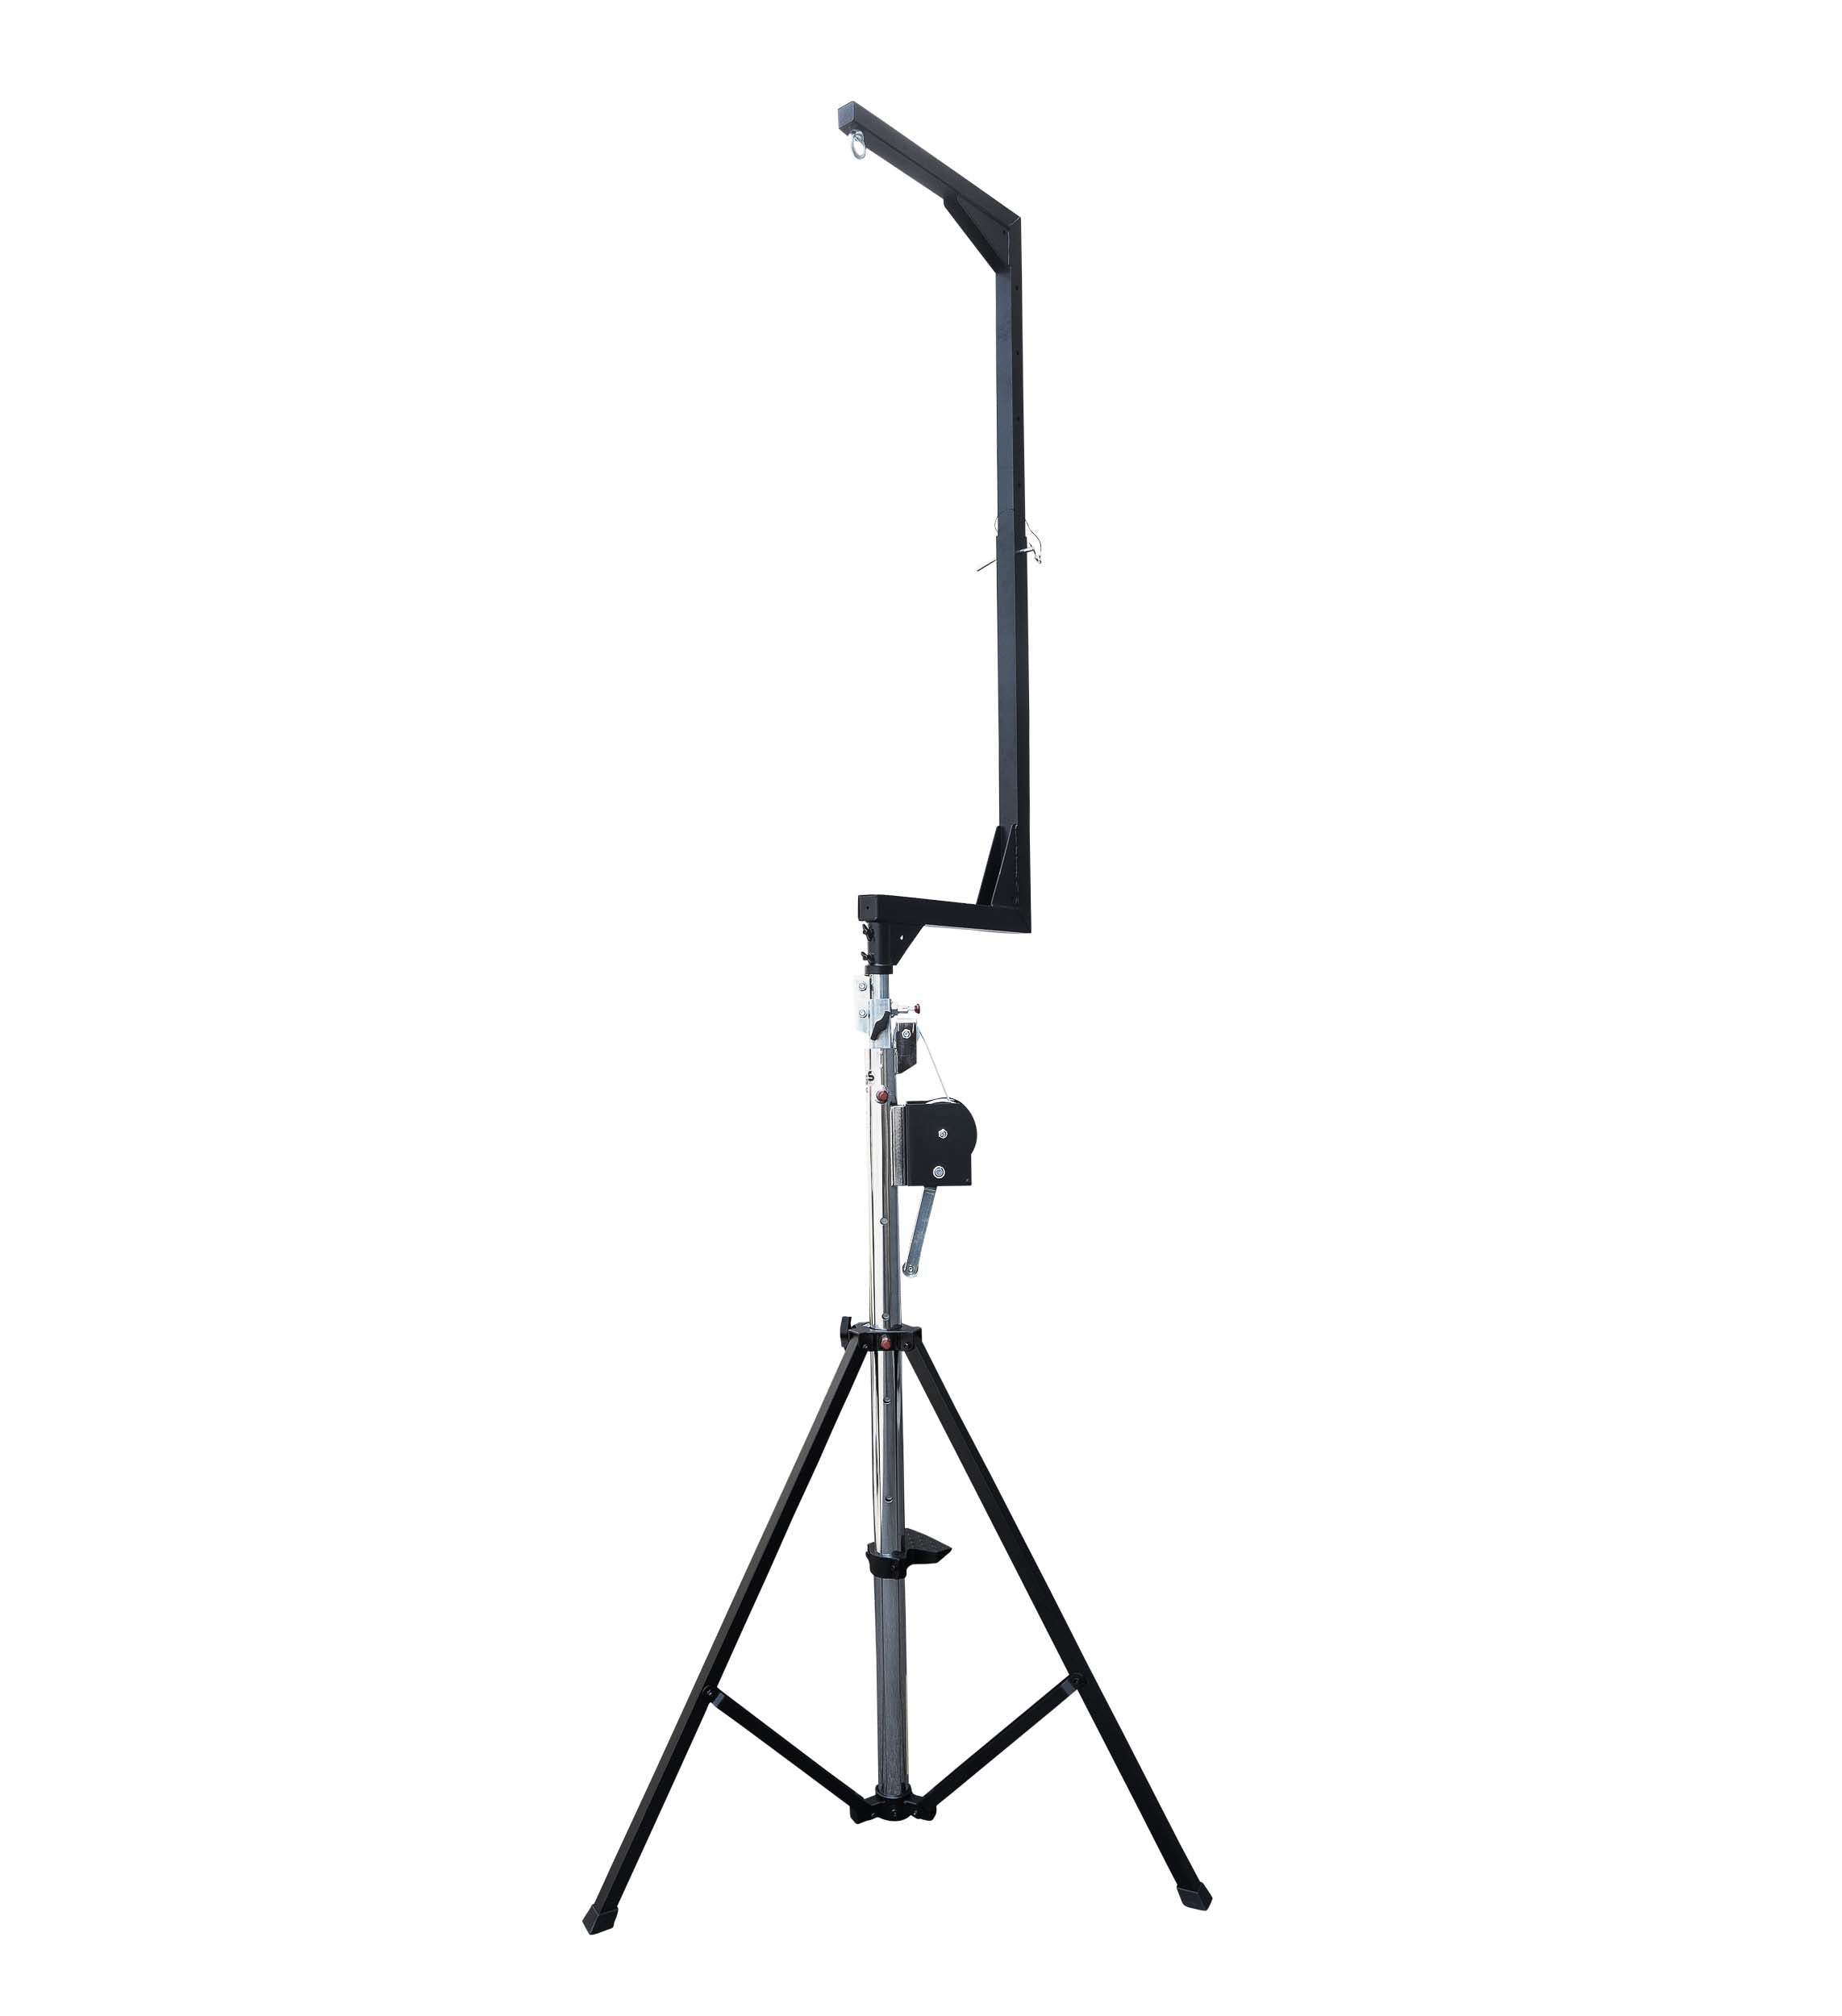 ProX XT-LA567-14FT220, Telescopic C-Shape Support for Small Line Array Speakers Max Load Incl XT-CRANK14FT220 Crank Stand by ProX Cases